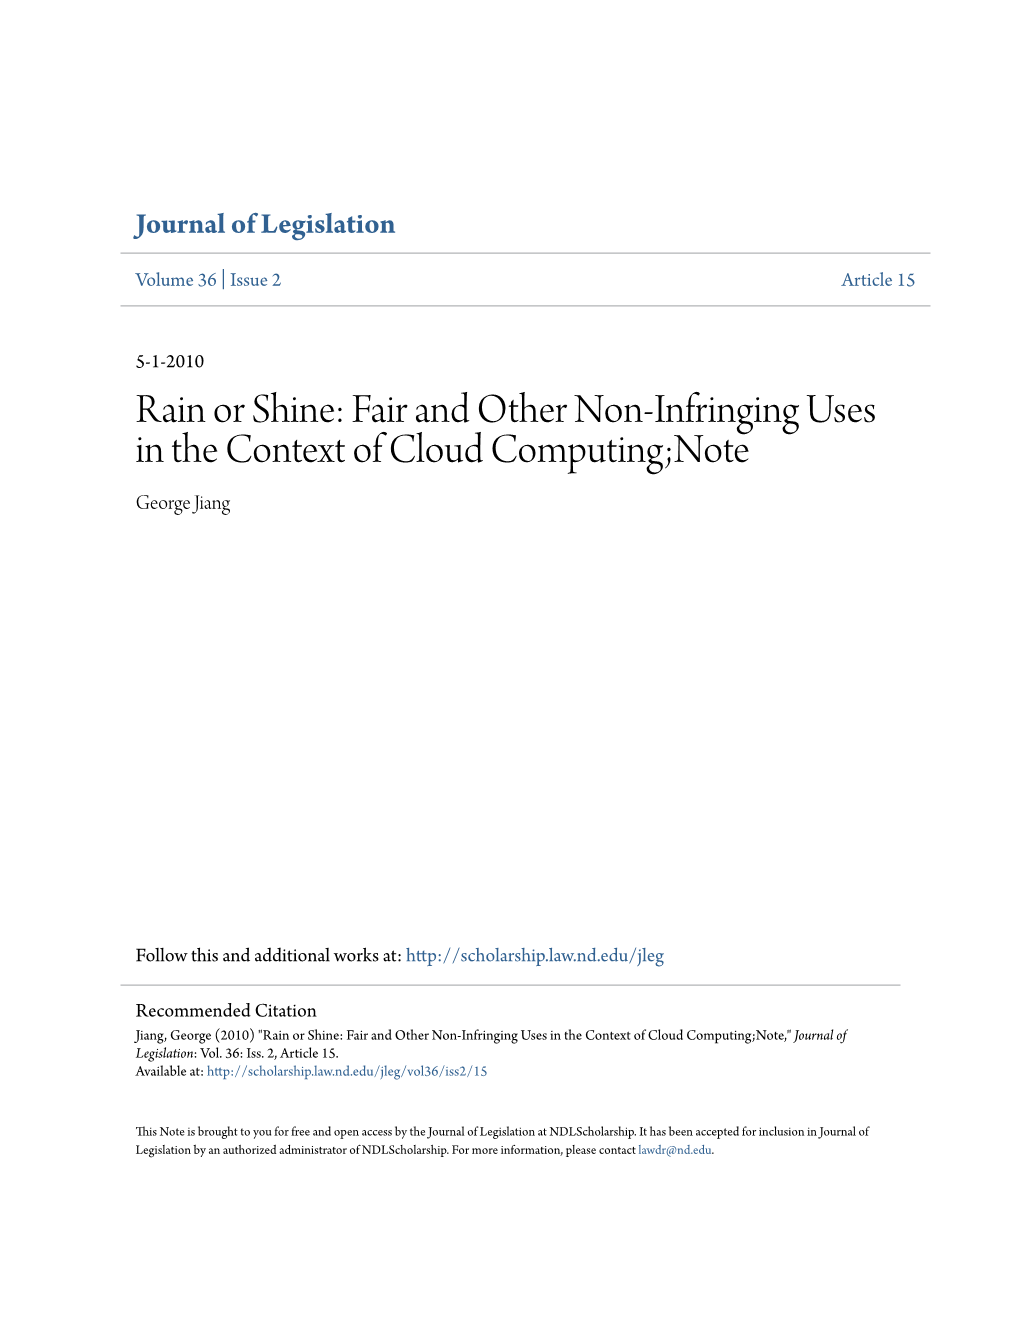 Fair and Other Non-Infringing Uses in the Context of Cloud Computing;Note George Jiang